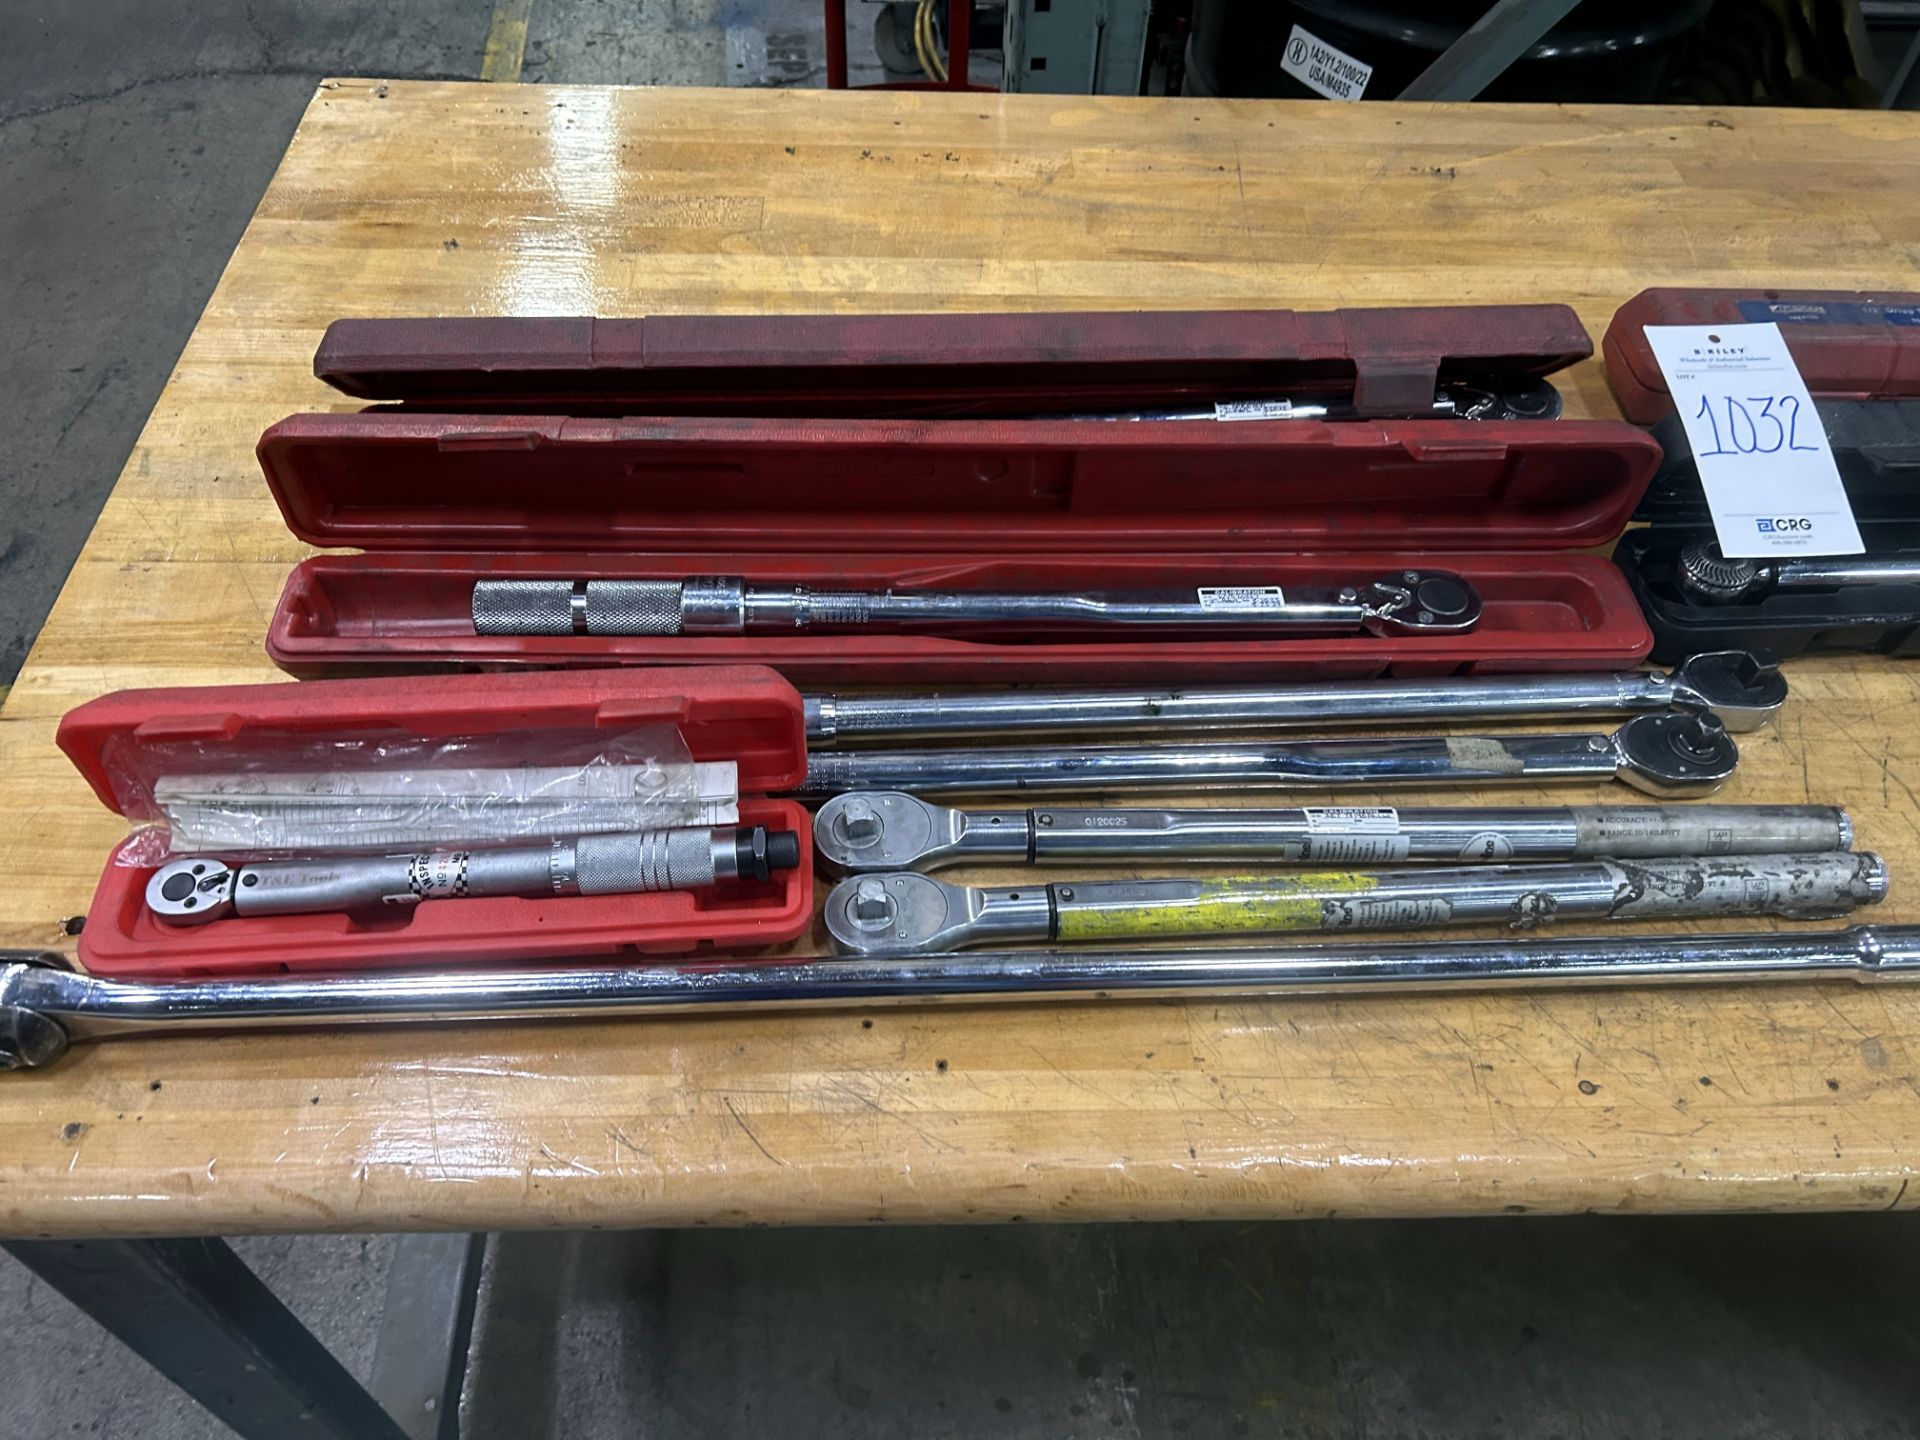 Large assortment of torque wrenches and sockets - Image 2 of 3